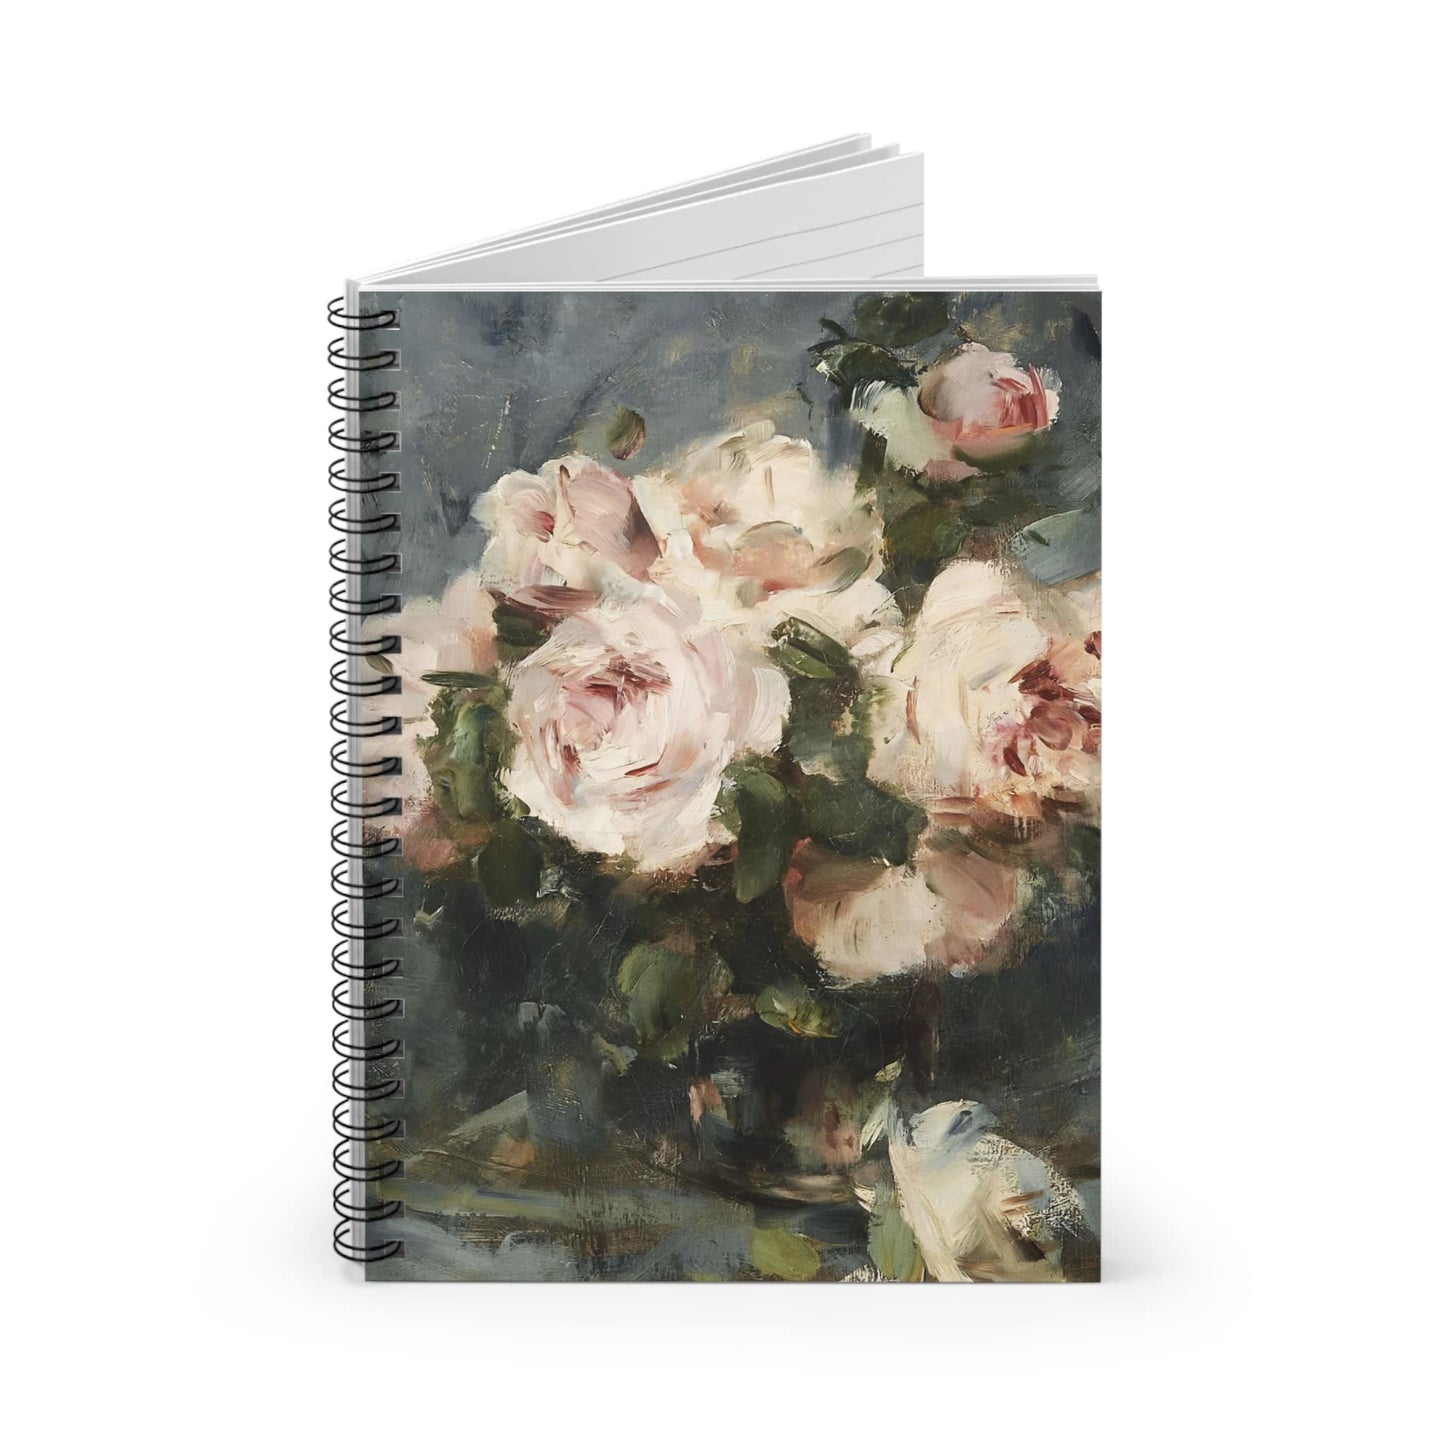 Abstract Flower Spiral Notebook Standing up on White Desk